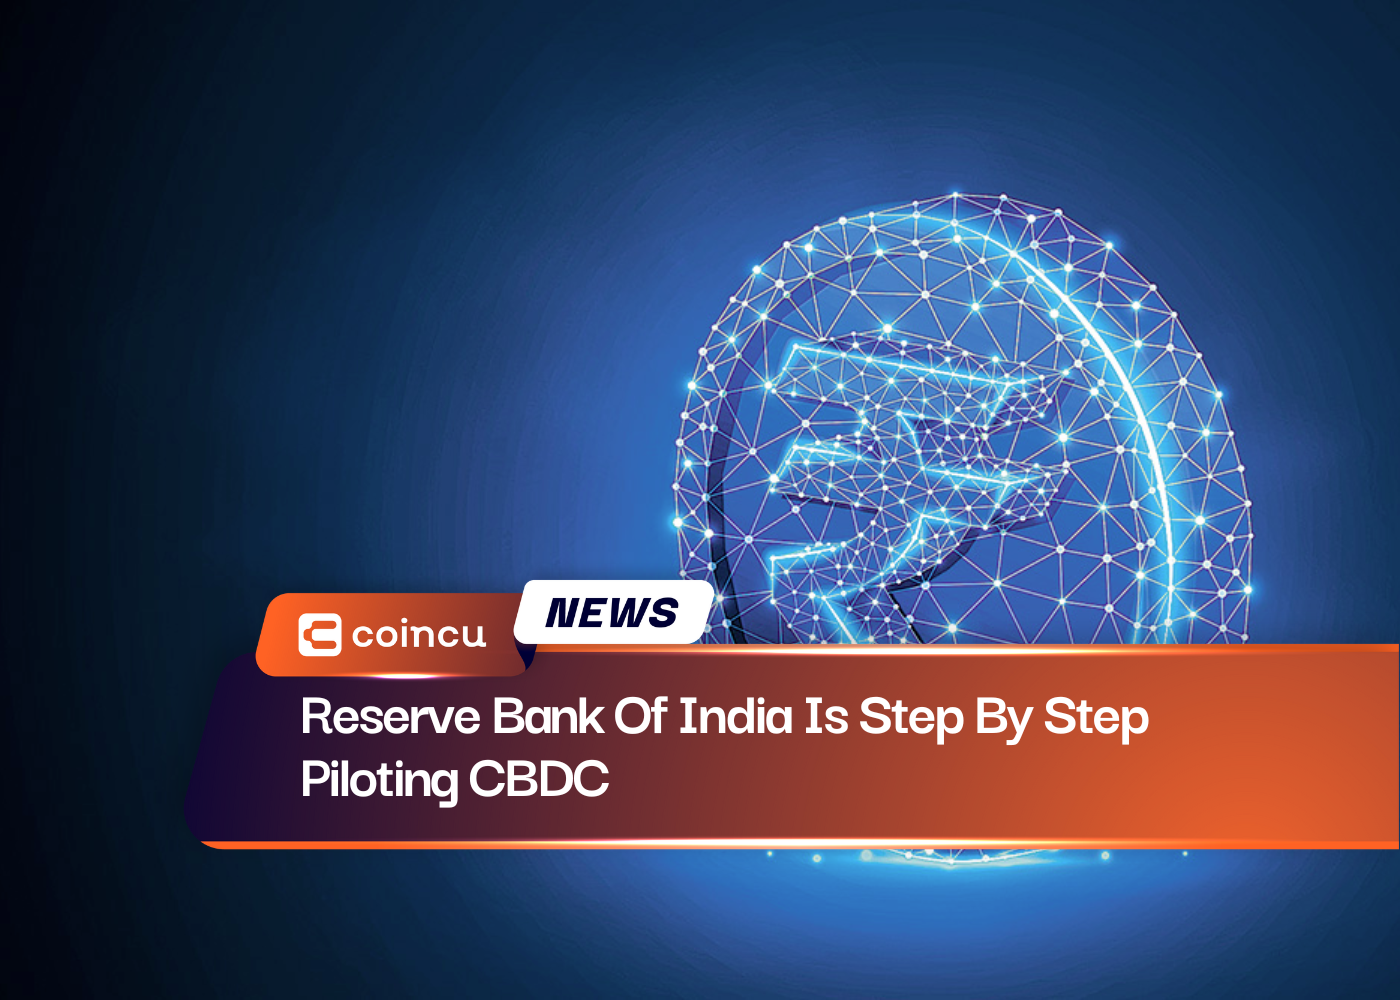 Reserve Bank Of India Is Step By Step Piloting CBDC